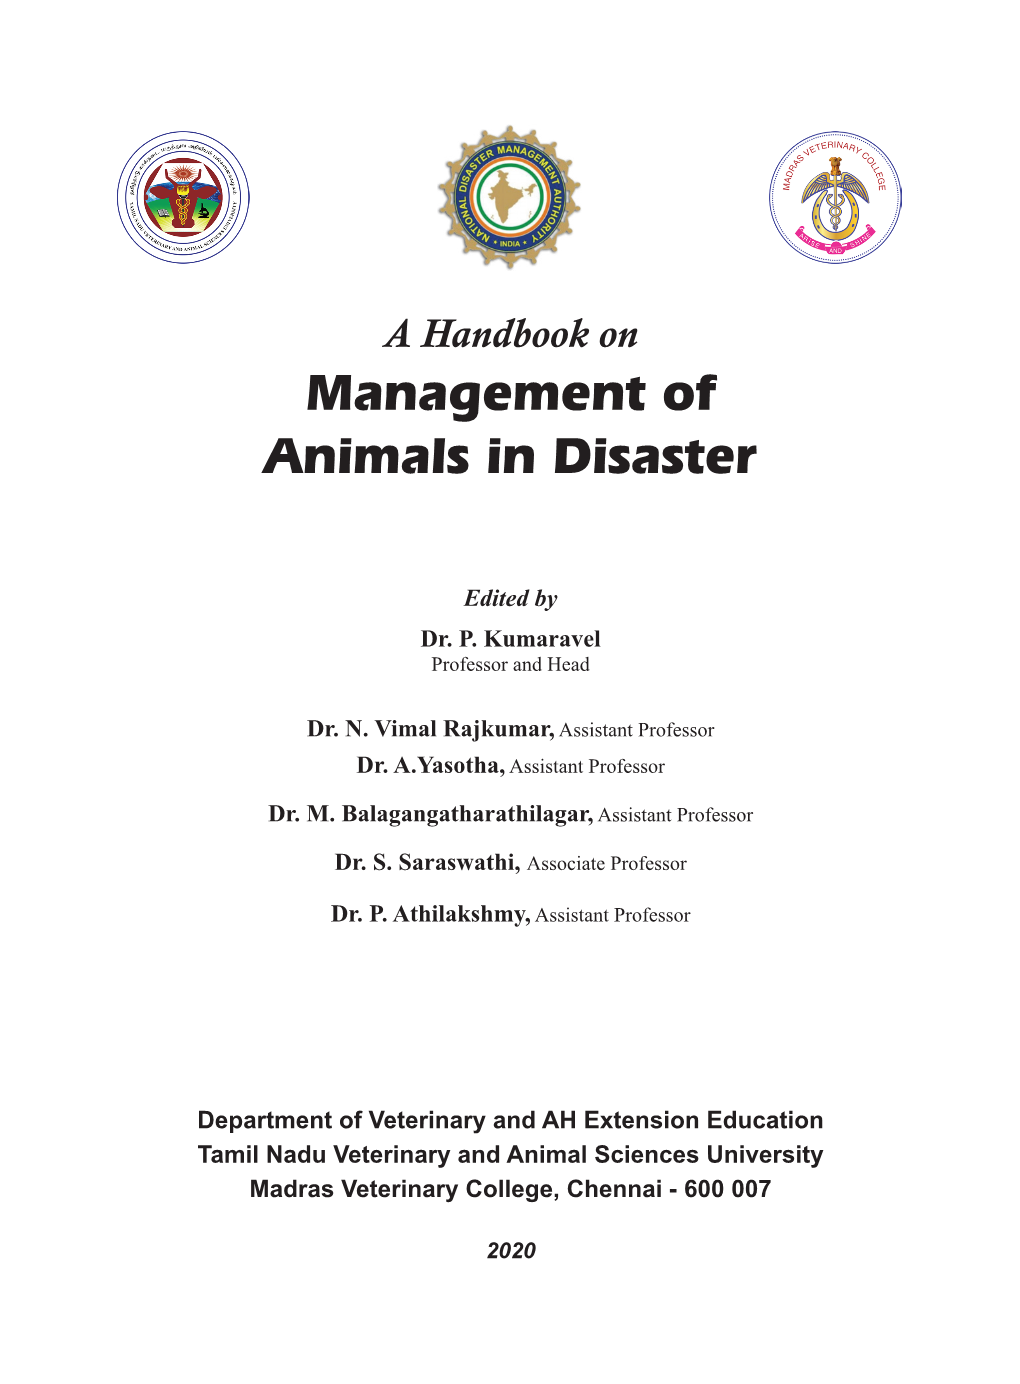 A Handbook on Management of Animals in Disaster